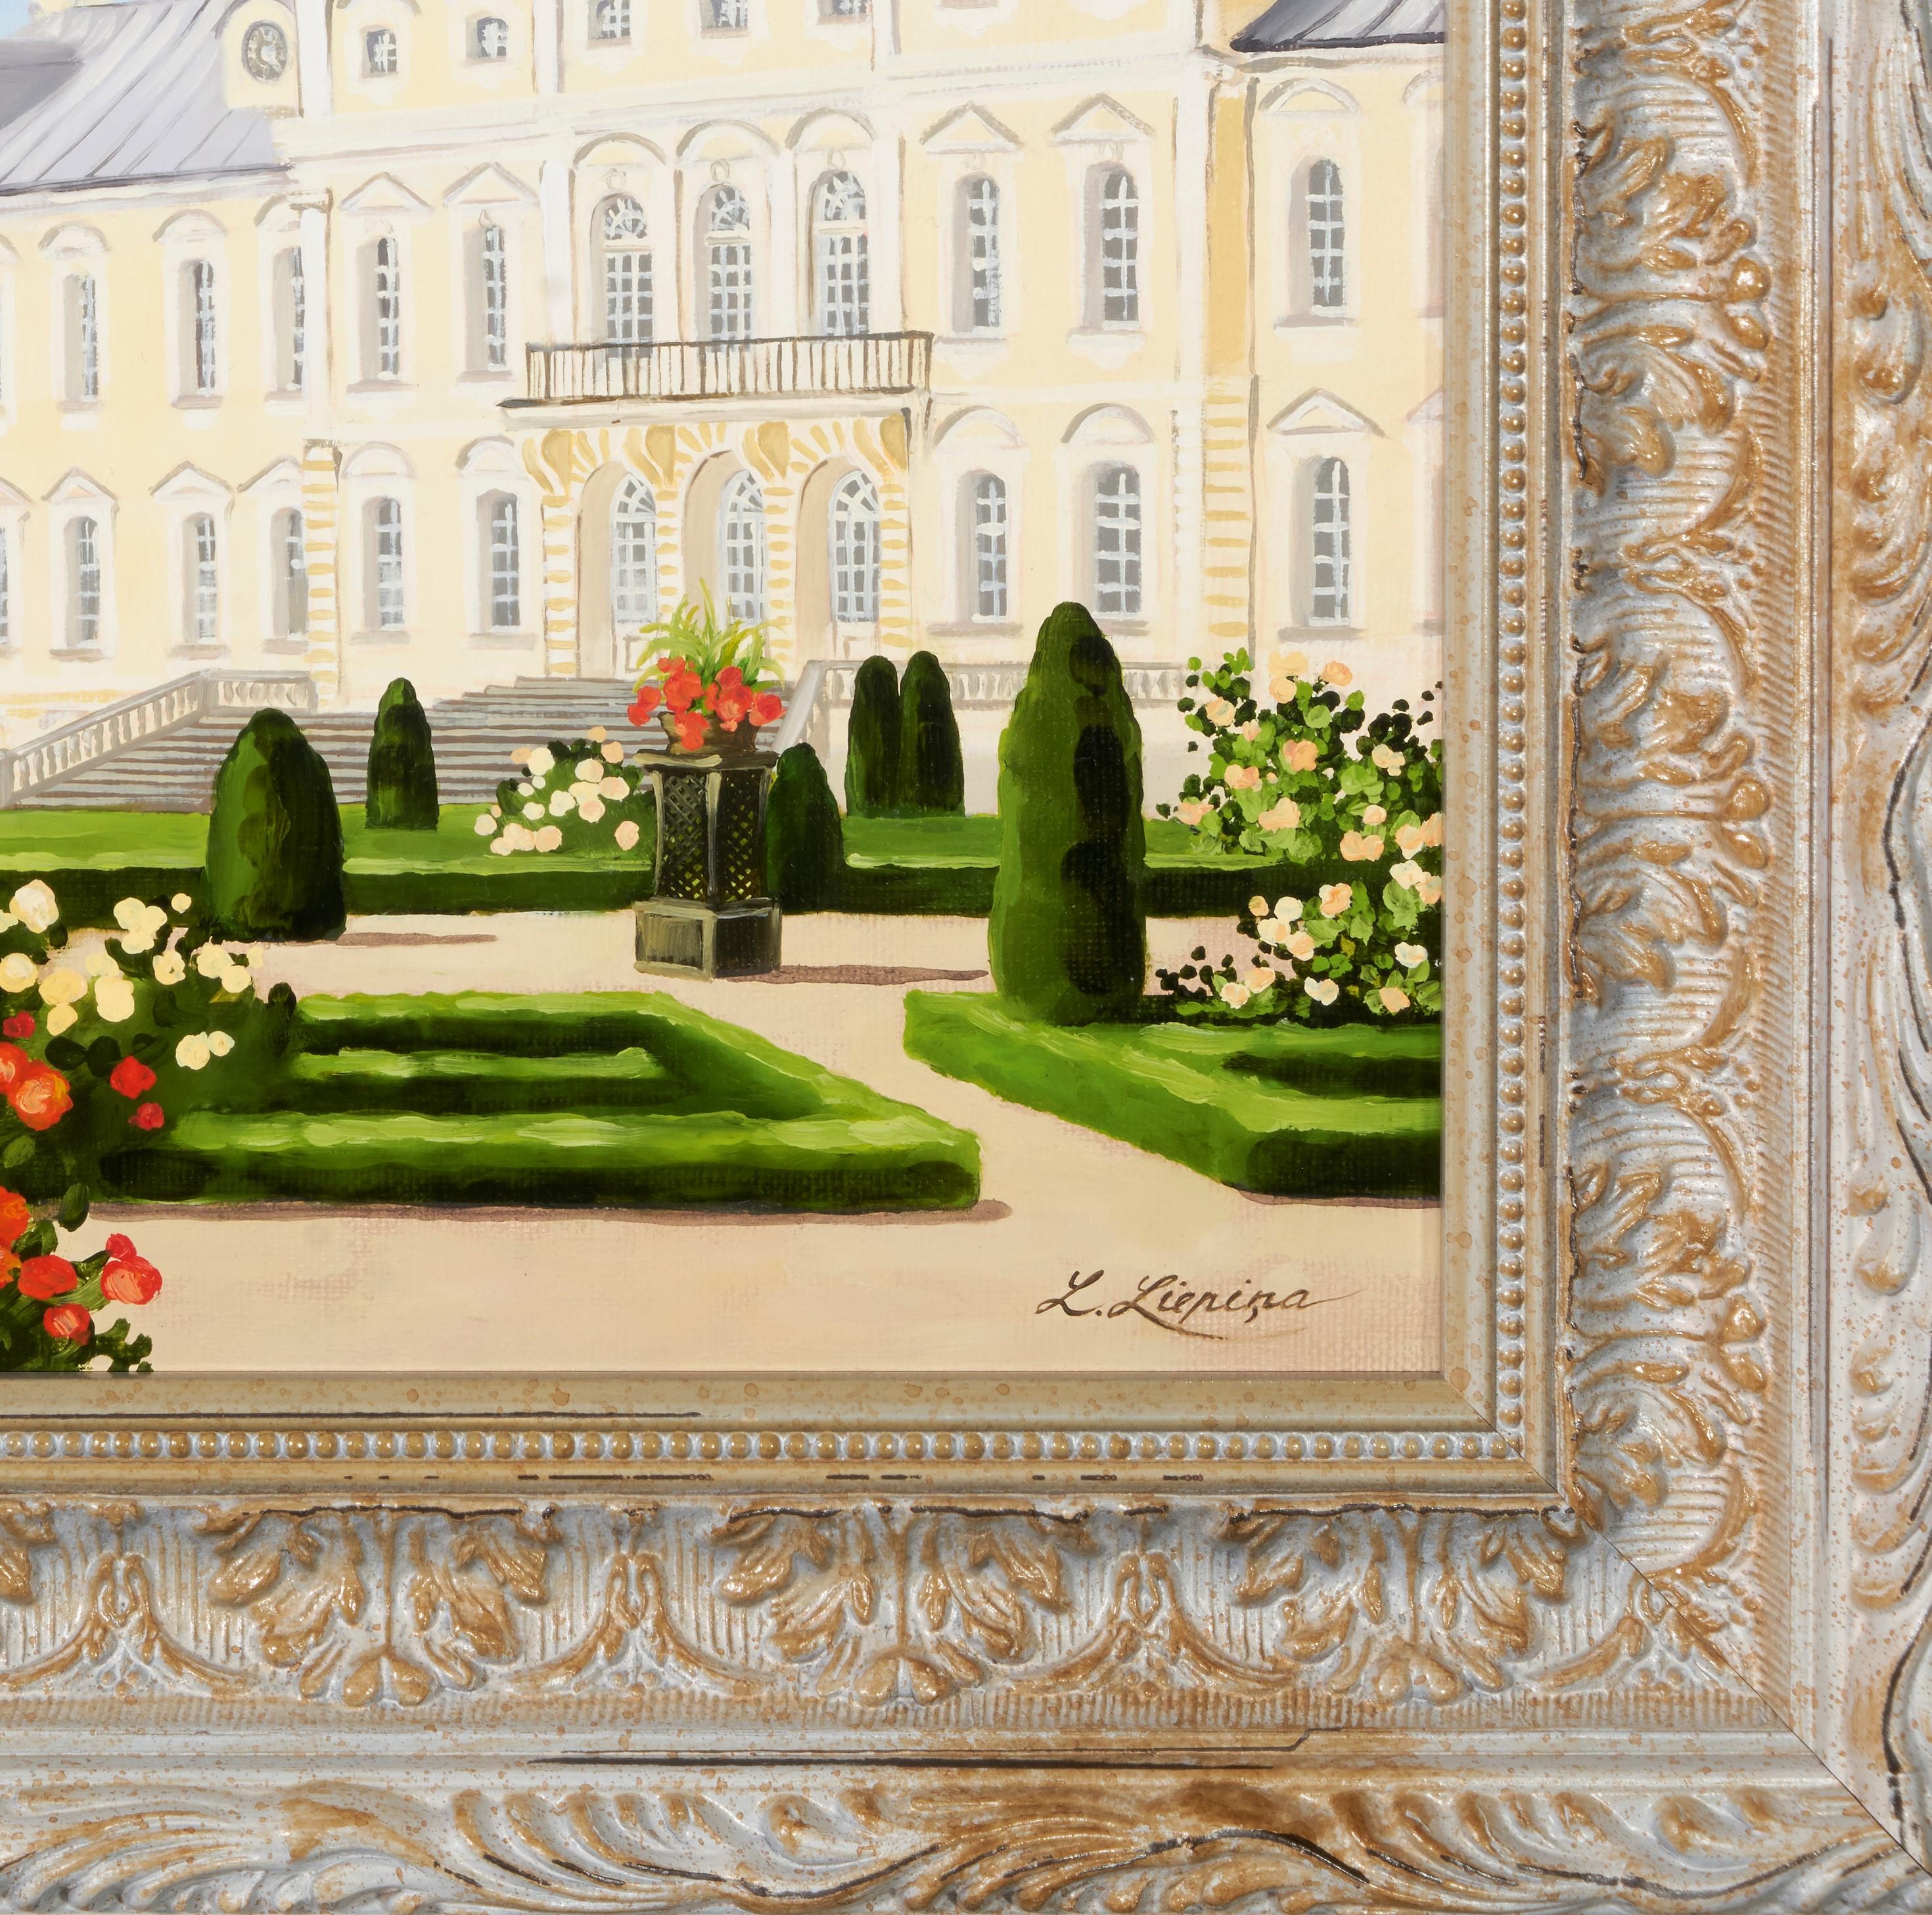 Rundale Palace, 2020. Oil on canvas, 25 x 30 cm  - Painting by Liene Liepina 